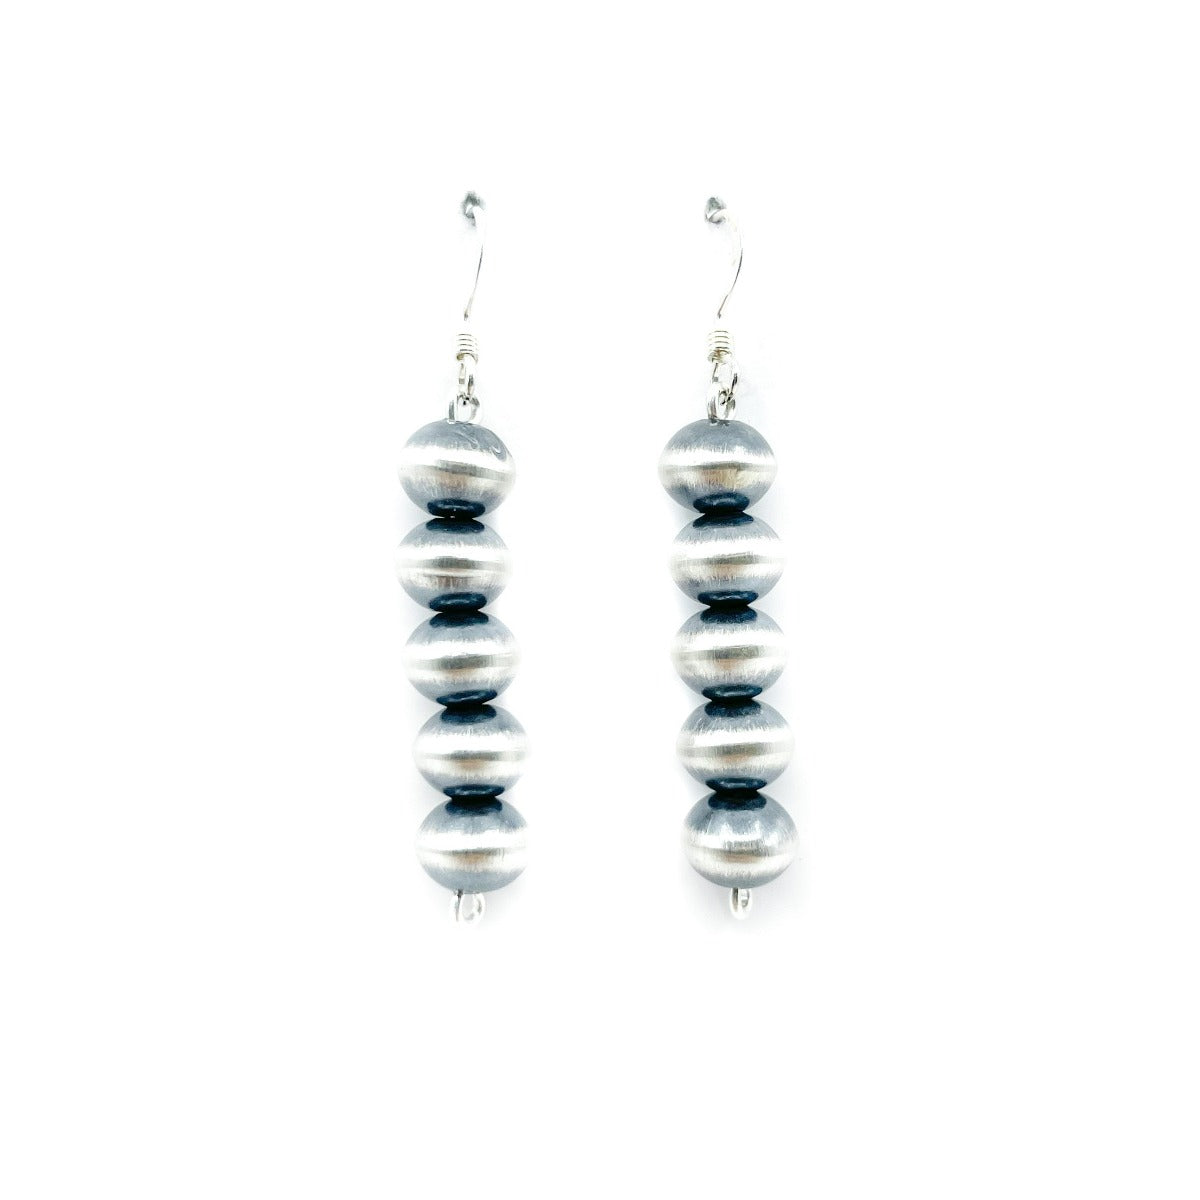 Sterling silver beads, each bead individually hand made Rich satin patina finish gives an antique look Sterling silver wires Each earring measures approximately 1.25 inch long, dangles from ear approximately 1.5 inches